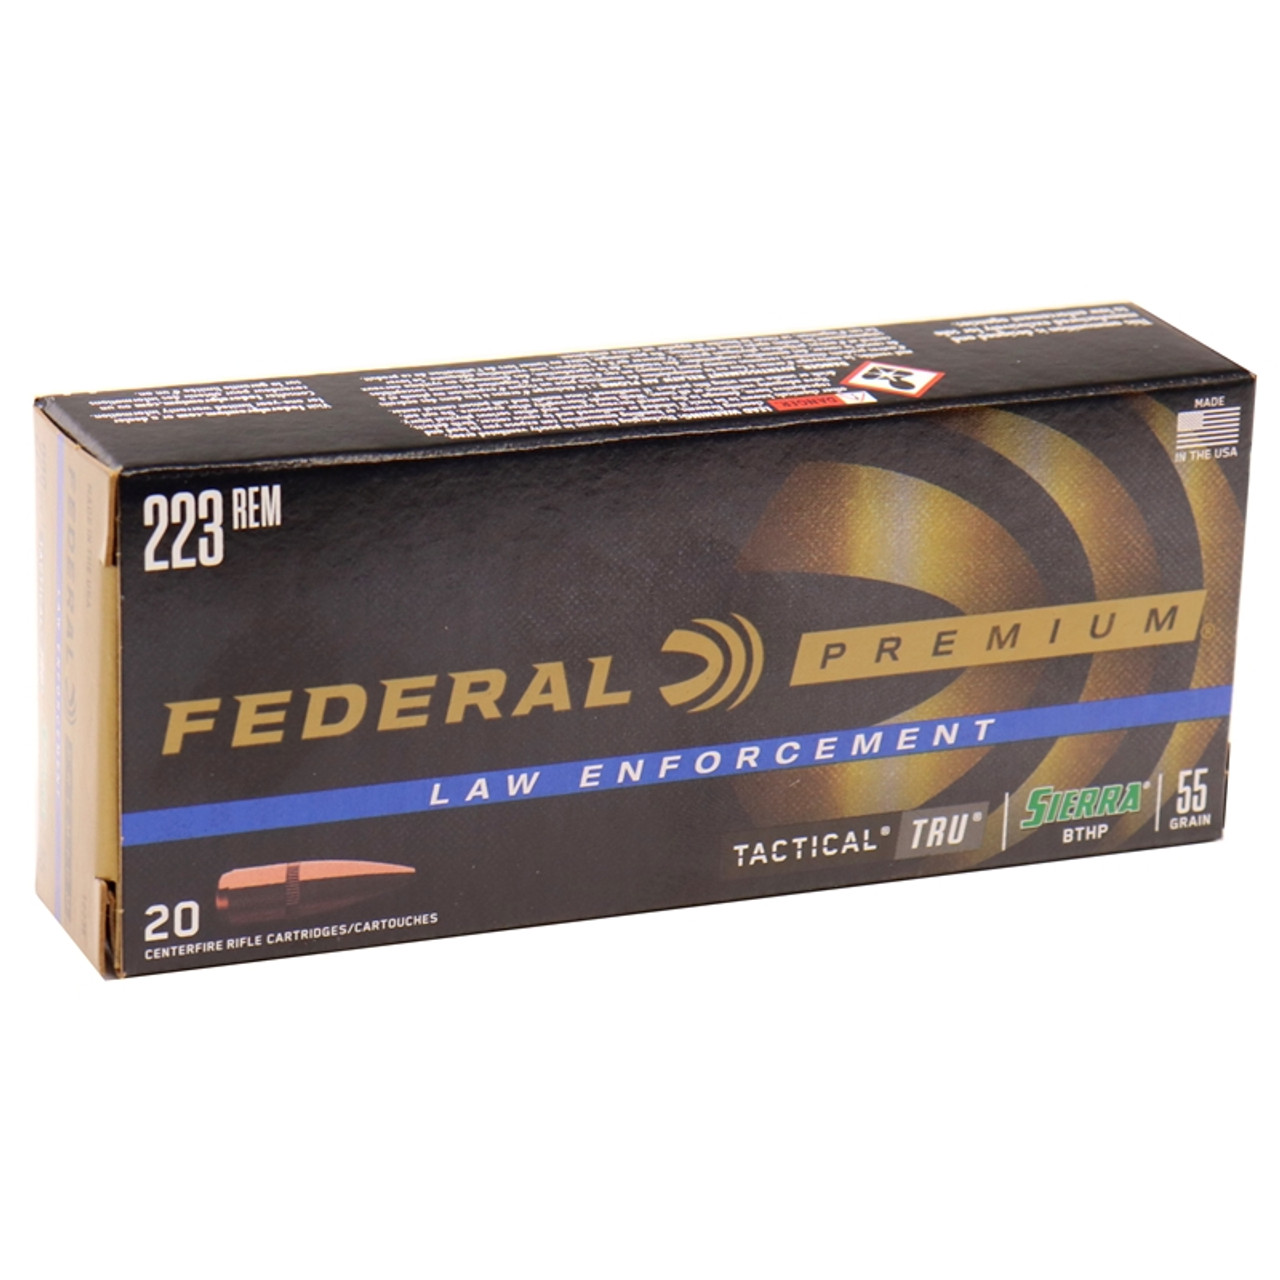 FEDERAL TACTICAL TRU 223 REMINGTON AMMO 55 GRAIN SIERRA GAMEKING HOLLOW POINT - T223E

Federal Law Enforcement Tactical TRU 223 Remington 55 Grain Sierra GameKing Hollow Point ammo for sale online at cheap discount prices with free shipping available on bulk 223 Remington ammunition only at our online store TargetSportsUSA.com. Target Sports USA carries the entire line of Federal Law Enforcement ammunition for sale online with free shipping on bulk ammo including this Federal Law Enforcement Tactical TRU 223 Remington Ammo 55 Grain Sierra GameKing Hollow Point.

Federal Law Enforcement Tactical TRU 223 Remington Ammo 55 Grain Sierra GameKing Hollow Point ammo review offers the following information; For nearly a century Federal Ammunition has put its focus on manufacturing quality products with cutting edge technology. This dedication to excellence has given Federal a competitive edge as an ammunition technology giant. Today the company is well known for producing high grade centerfire, rimfire, and shotshell ammunition that shooters everywhere know and trust. The TRU, or Tactical Urban Rifle, line from Federal is custom made ammo specially crafted for use in semi-auto rifles. TRU meets rigorous Mil-Quality standards, and is made not to interfere with vision in the dark of night. The TRU case and web are built using thicker brass, adding the extra strength needed for the high powered rifle. TRU primers are crimped for added holding ability. This virtually eliminates backed out primers that can lock-up your weapon. With TRU ammunition, potentially disastrous situations are greatly reduced. TRU bullets are specifically engineered ranging from fragmenting designs for tactical entry to deeper penetrating bullets for patrol. This Federal 223 Remington TRU ammo features brass cases, boxer primer and is non corrosive and 100% reloadable for shooters that love to reload their 223 Remington ammo. It features a 55 Grain Sierra GameKIng Boat Tail Hollow Point bullet. Law Enforcement Tactical TRU ammo has a muzzle velocity of 3220 feet per second and a muzzle energy of 1236 ft lbs.

The TRU, or Tactical Urban Rifle, line from Federal is custom made ammo specially crafted for use in semi-auto rifles.

This Federal 223 Remington TRU ammo features brass cases, boxer primer and is non corrosive and 100% reloadable for shooters that love to reload their 223 Remington ammo.

TRU 223 Remington features a 55 Grain Sierra GameKIng Boat Tail Hollow Point bullet.

MPN	T223E
UPC	029465095130
Manufacturer	FEDERAL AMMO
Caliber	223 REMINGTON AMMO
Bullet Type	Hollow Point
Muzzle Velocity	3220 fps
Muzzle Energy	1266 ft. lbs
Primer	Boxer
Casing	Brass Casing
Ammo Rating	Personal Protection & Home Defense 223 Remington Ammo
